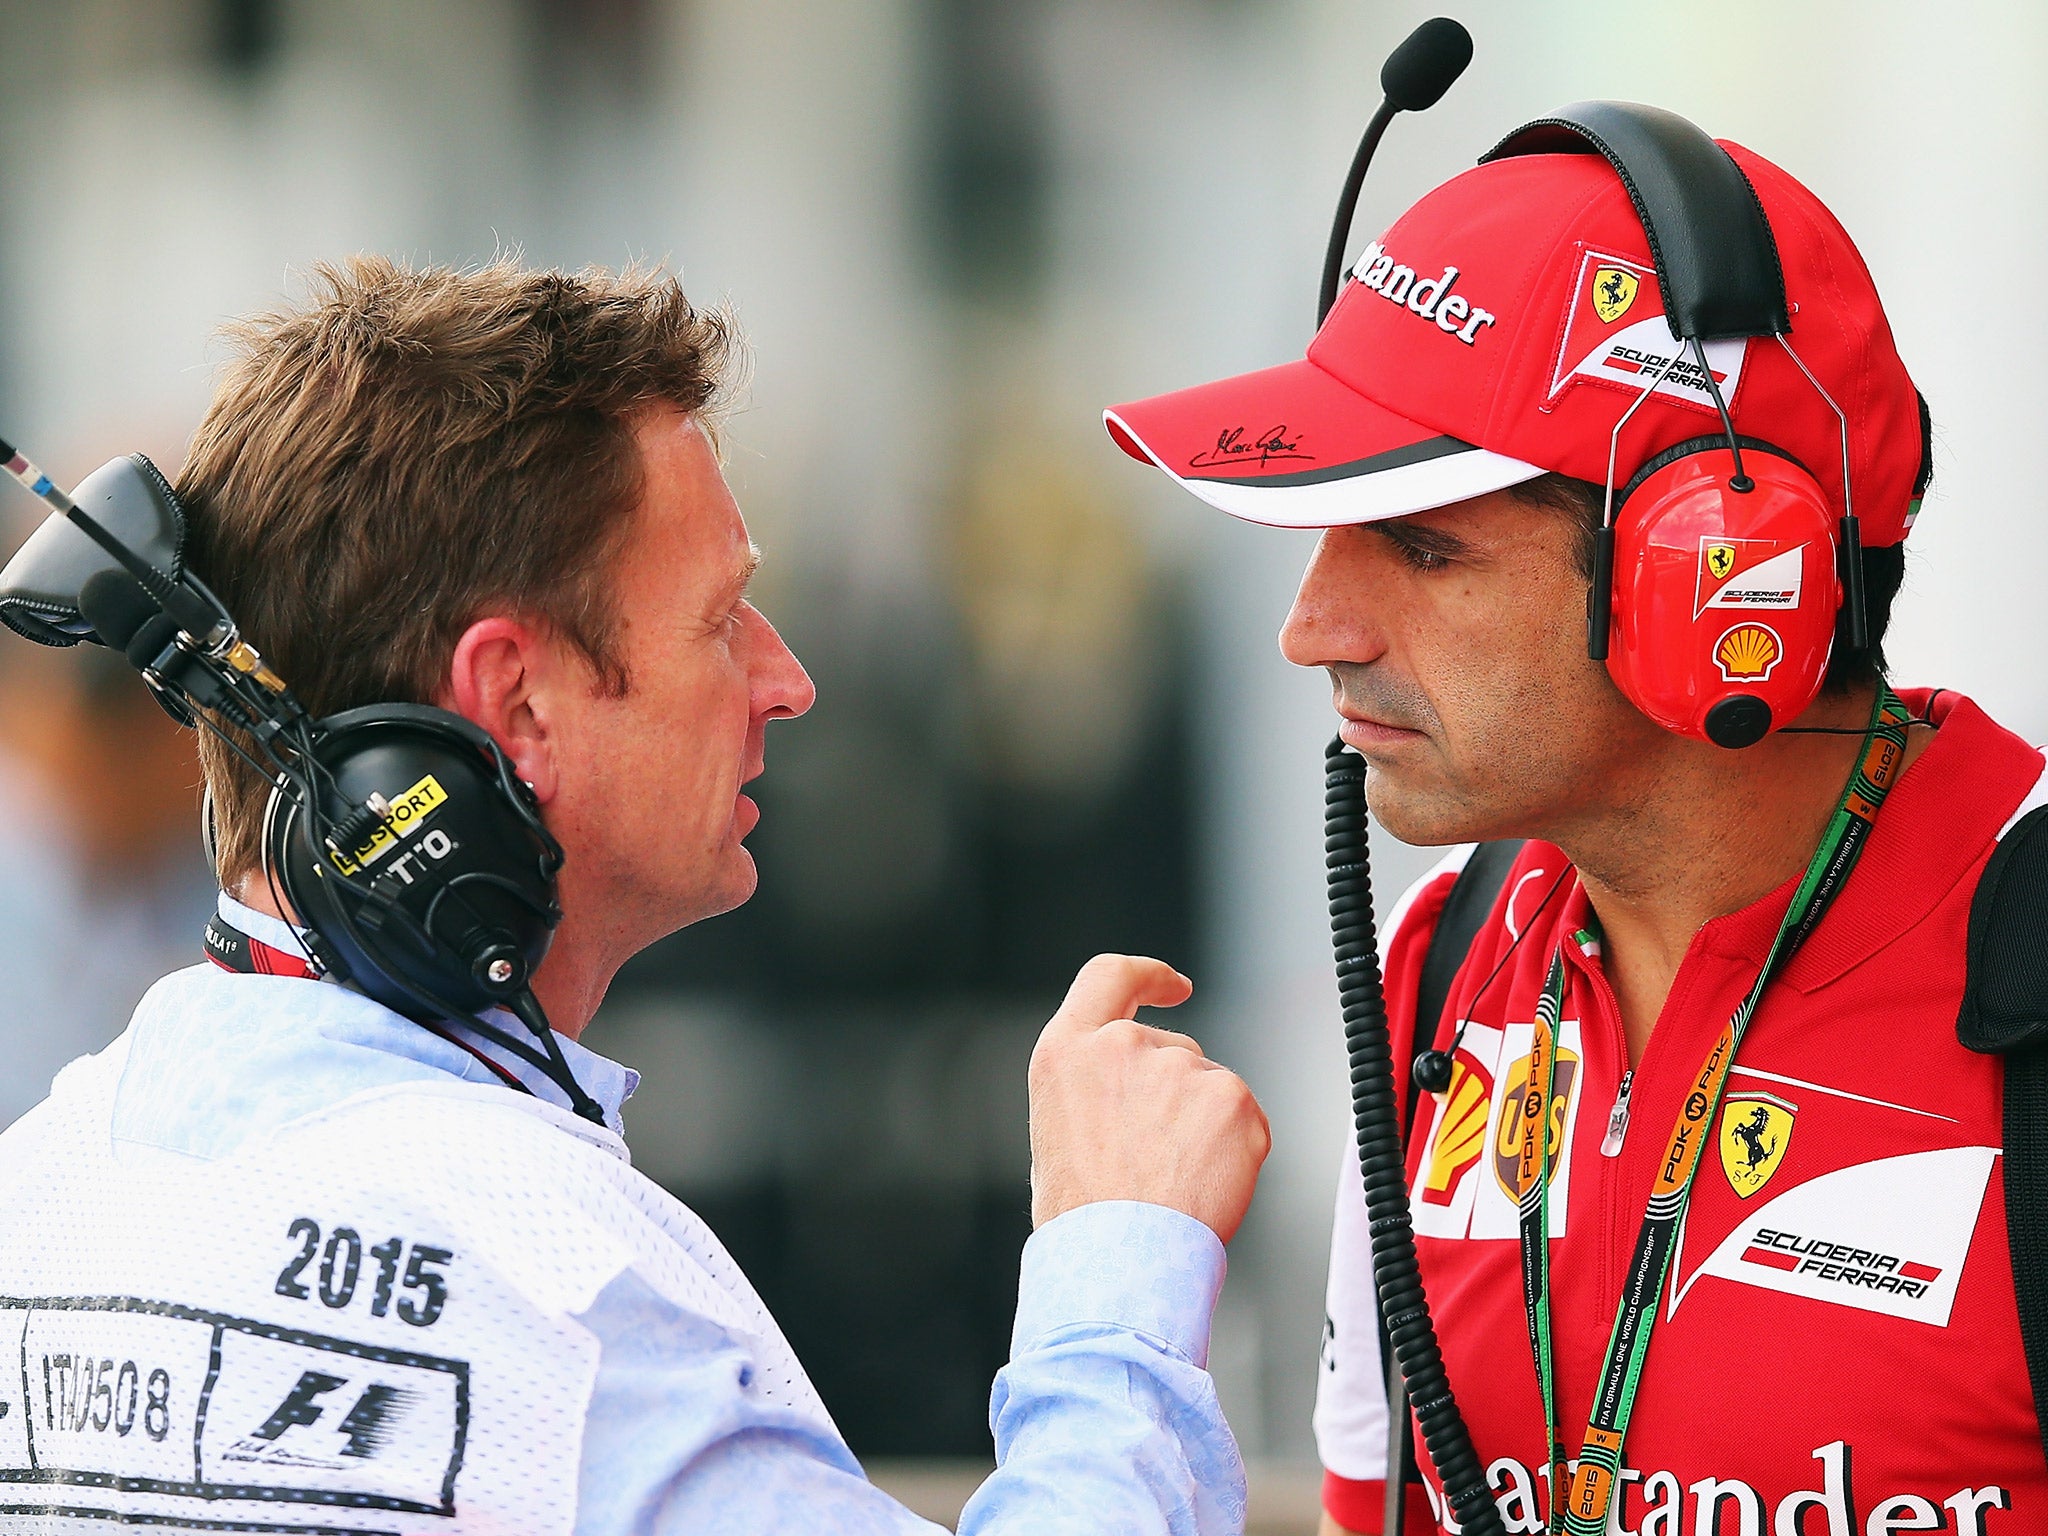 McNish has remained a regular figure in the F1 paddock since his retirement